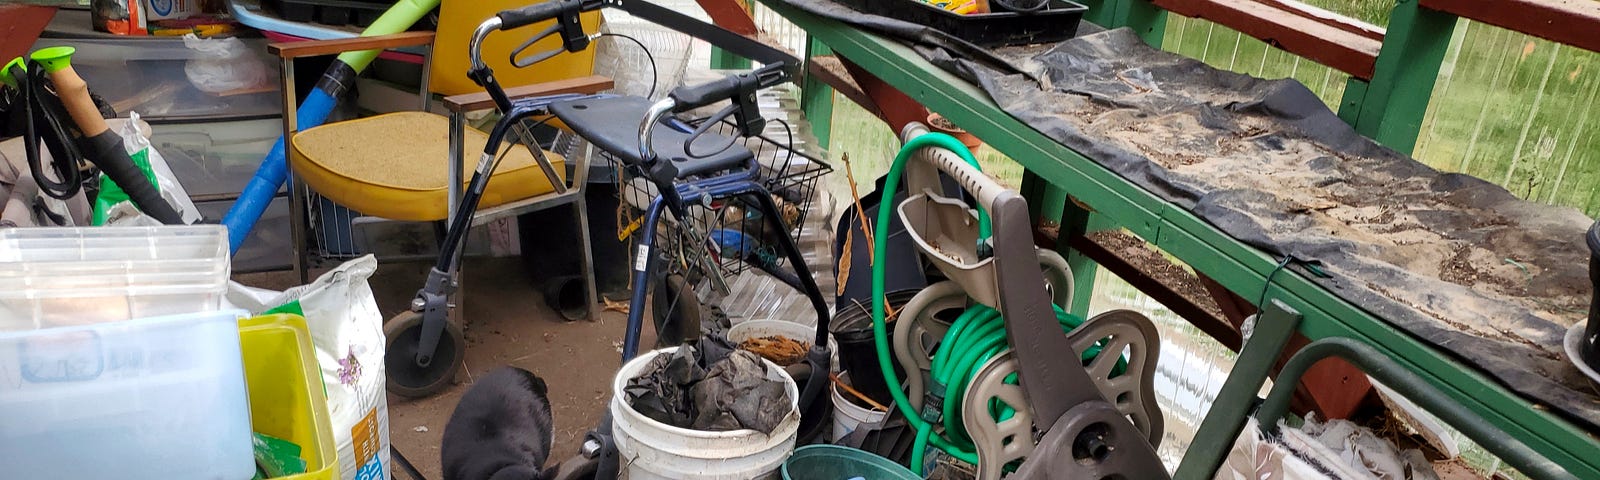 A black and white cat is walking towards the camera in a cluttered greenhouse filled with various items. There’s a bag of Miracle-Gro soil, a blue bucket with a red basin inside, and a green garden hose visible among the scattered objects.